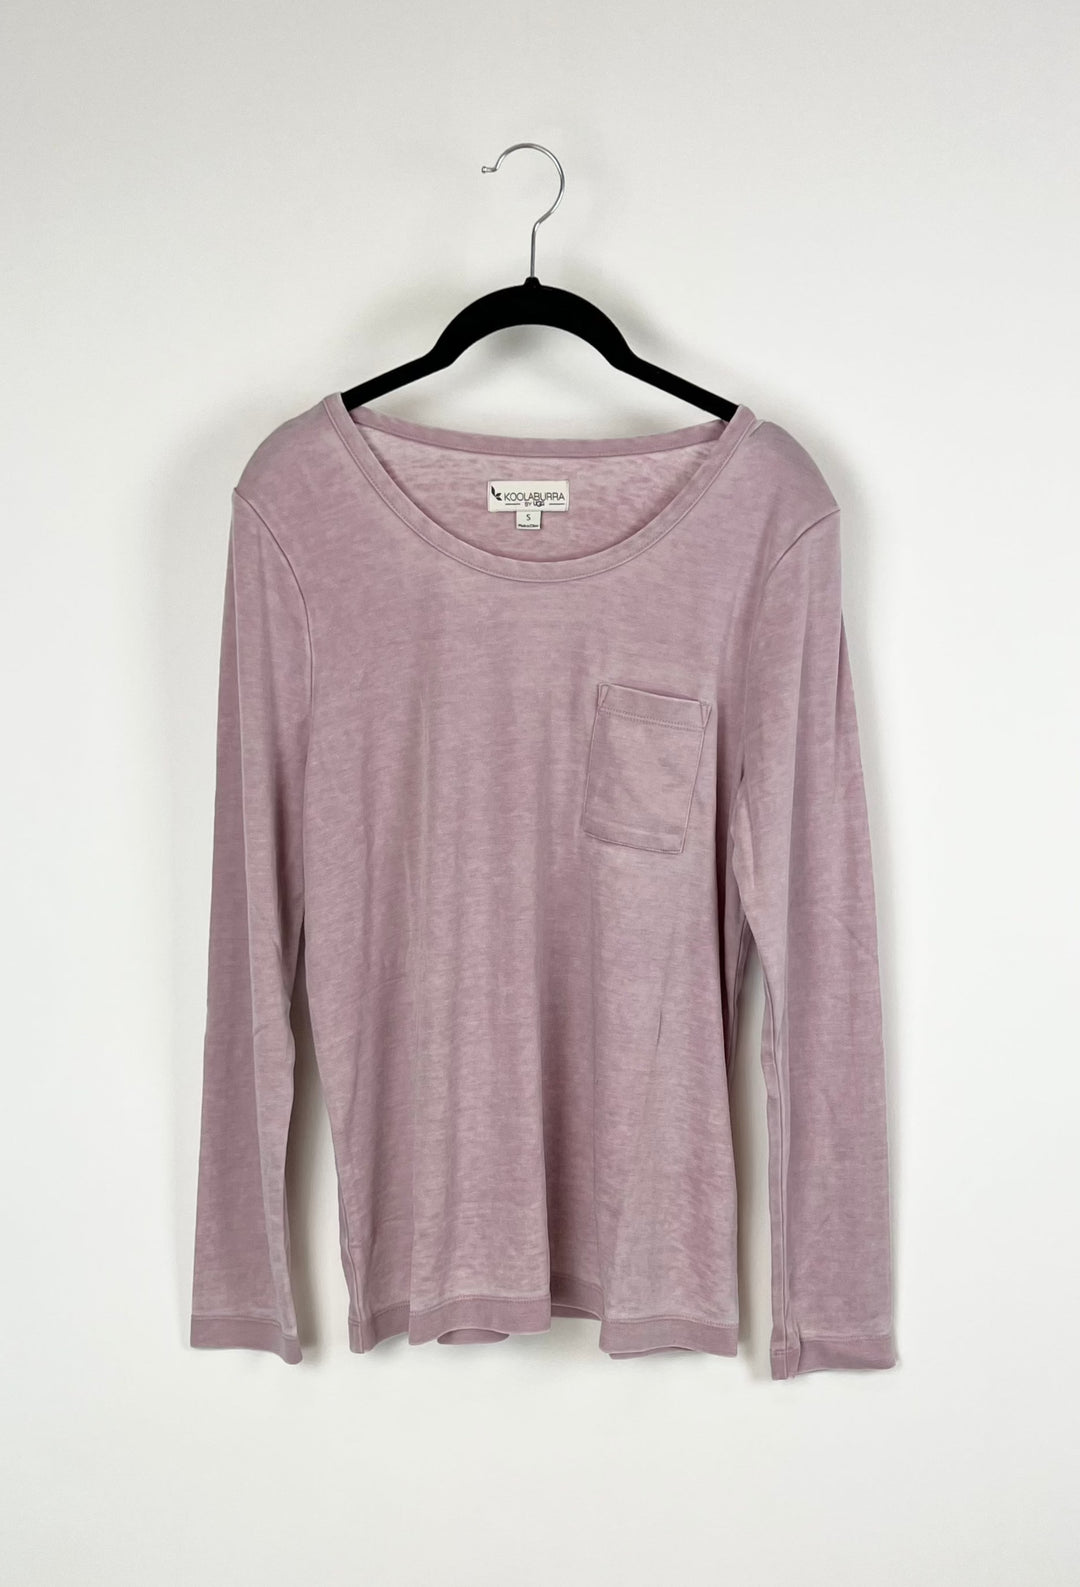 Pink Long Sleeve - Small